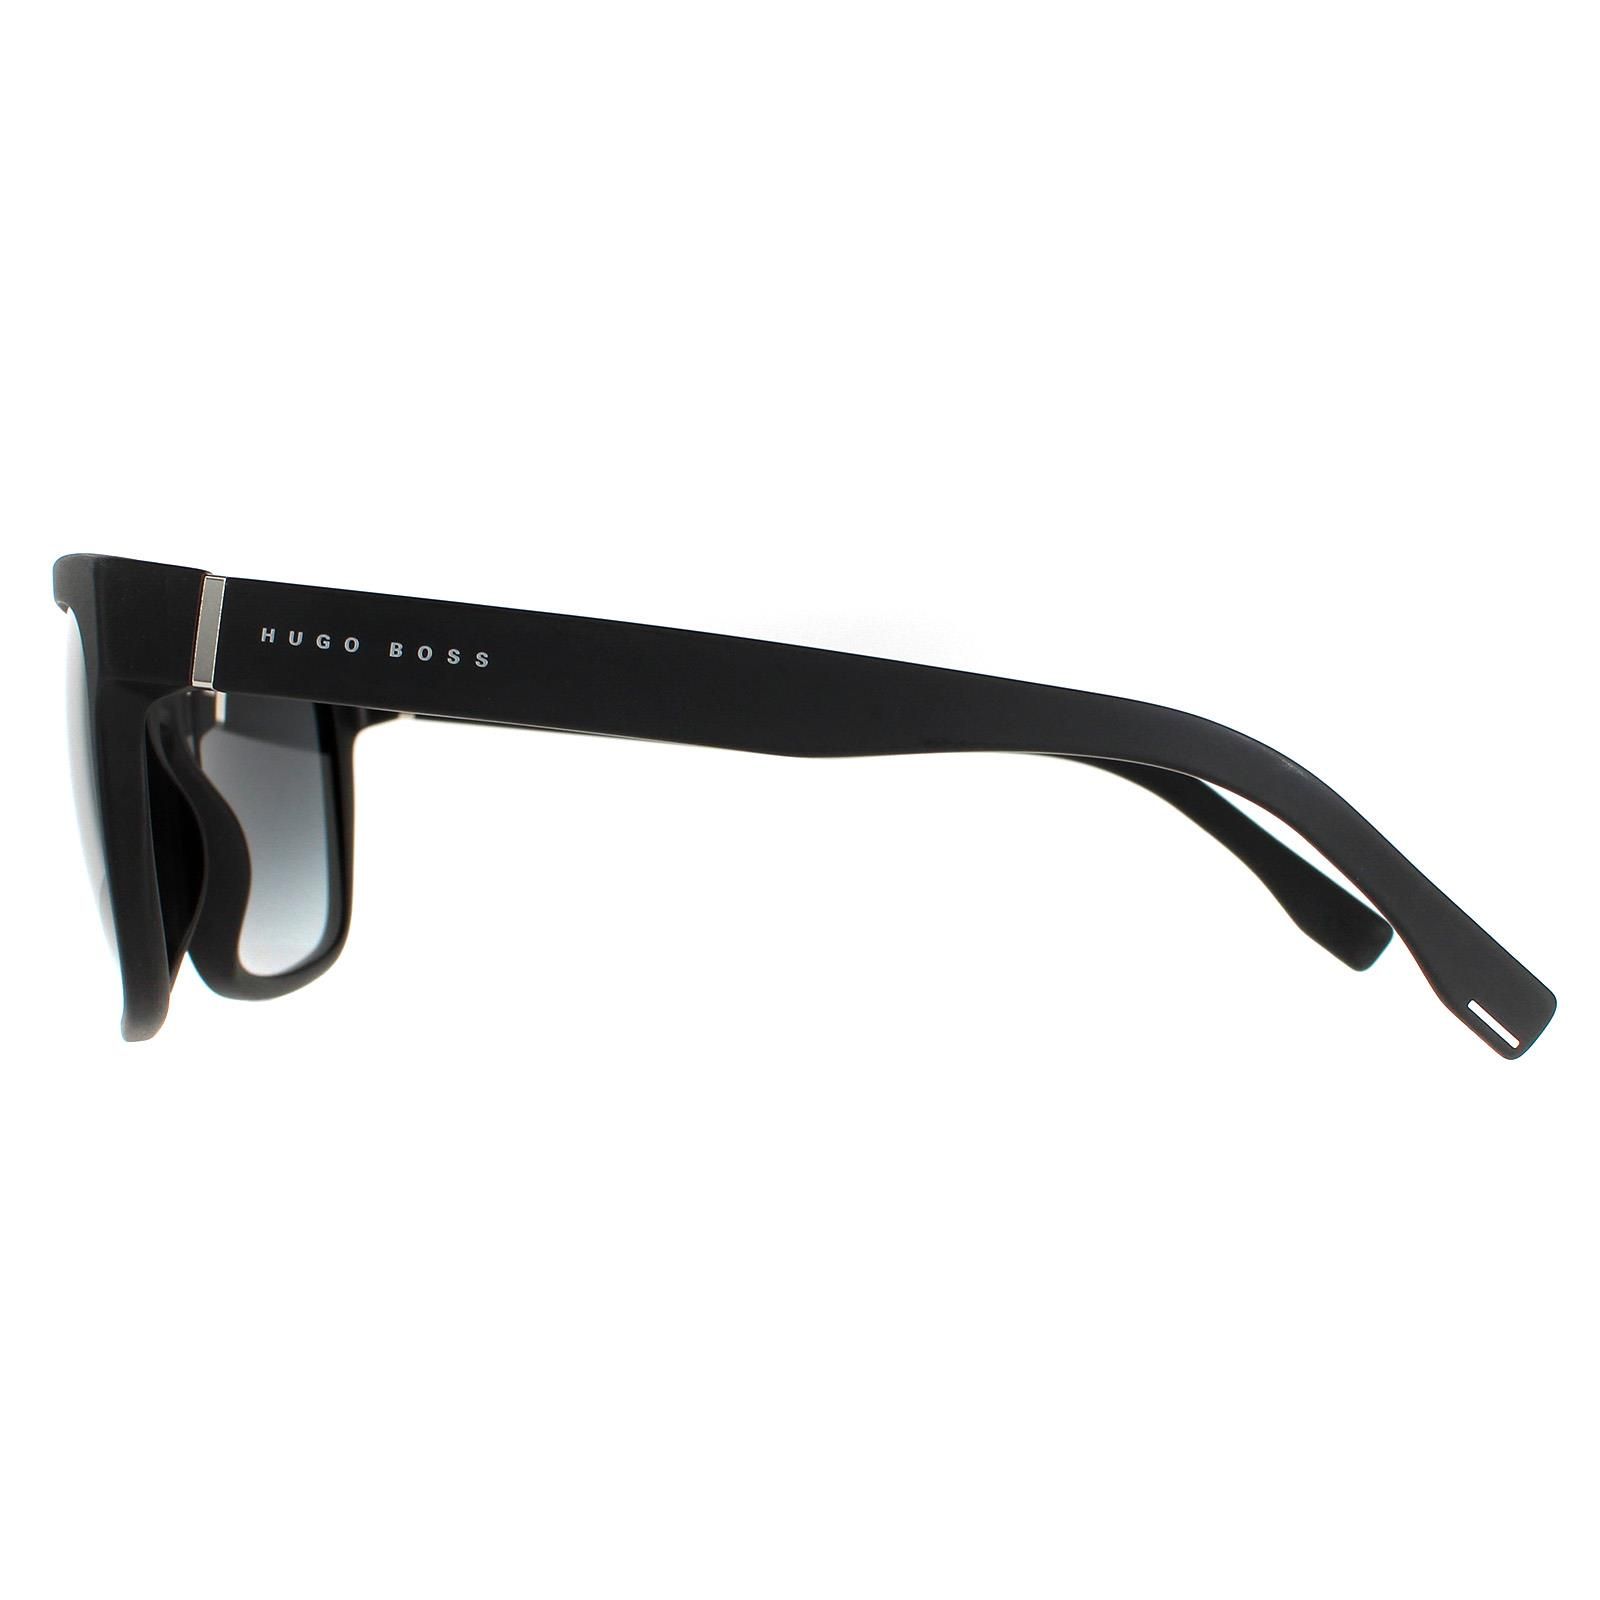 Hugo Boss Rectangle Mens Matte Black Dark Grey Gradient BOSS 0727/S/IT  Hugo Boss are a high quality modern style from Hugo Boss with a square shape but with enough curve to the front to hug the face nicely. A small Hugo Boss logo appears on the temples for that brand assurance.